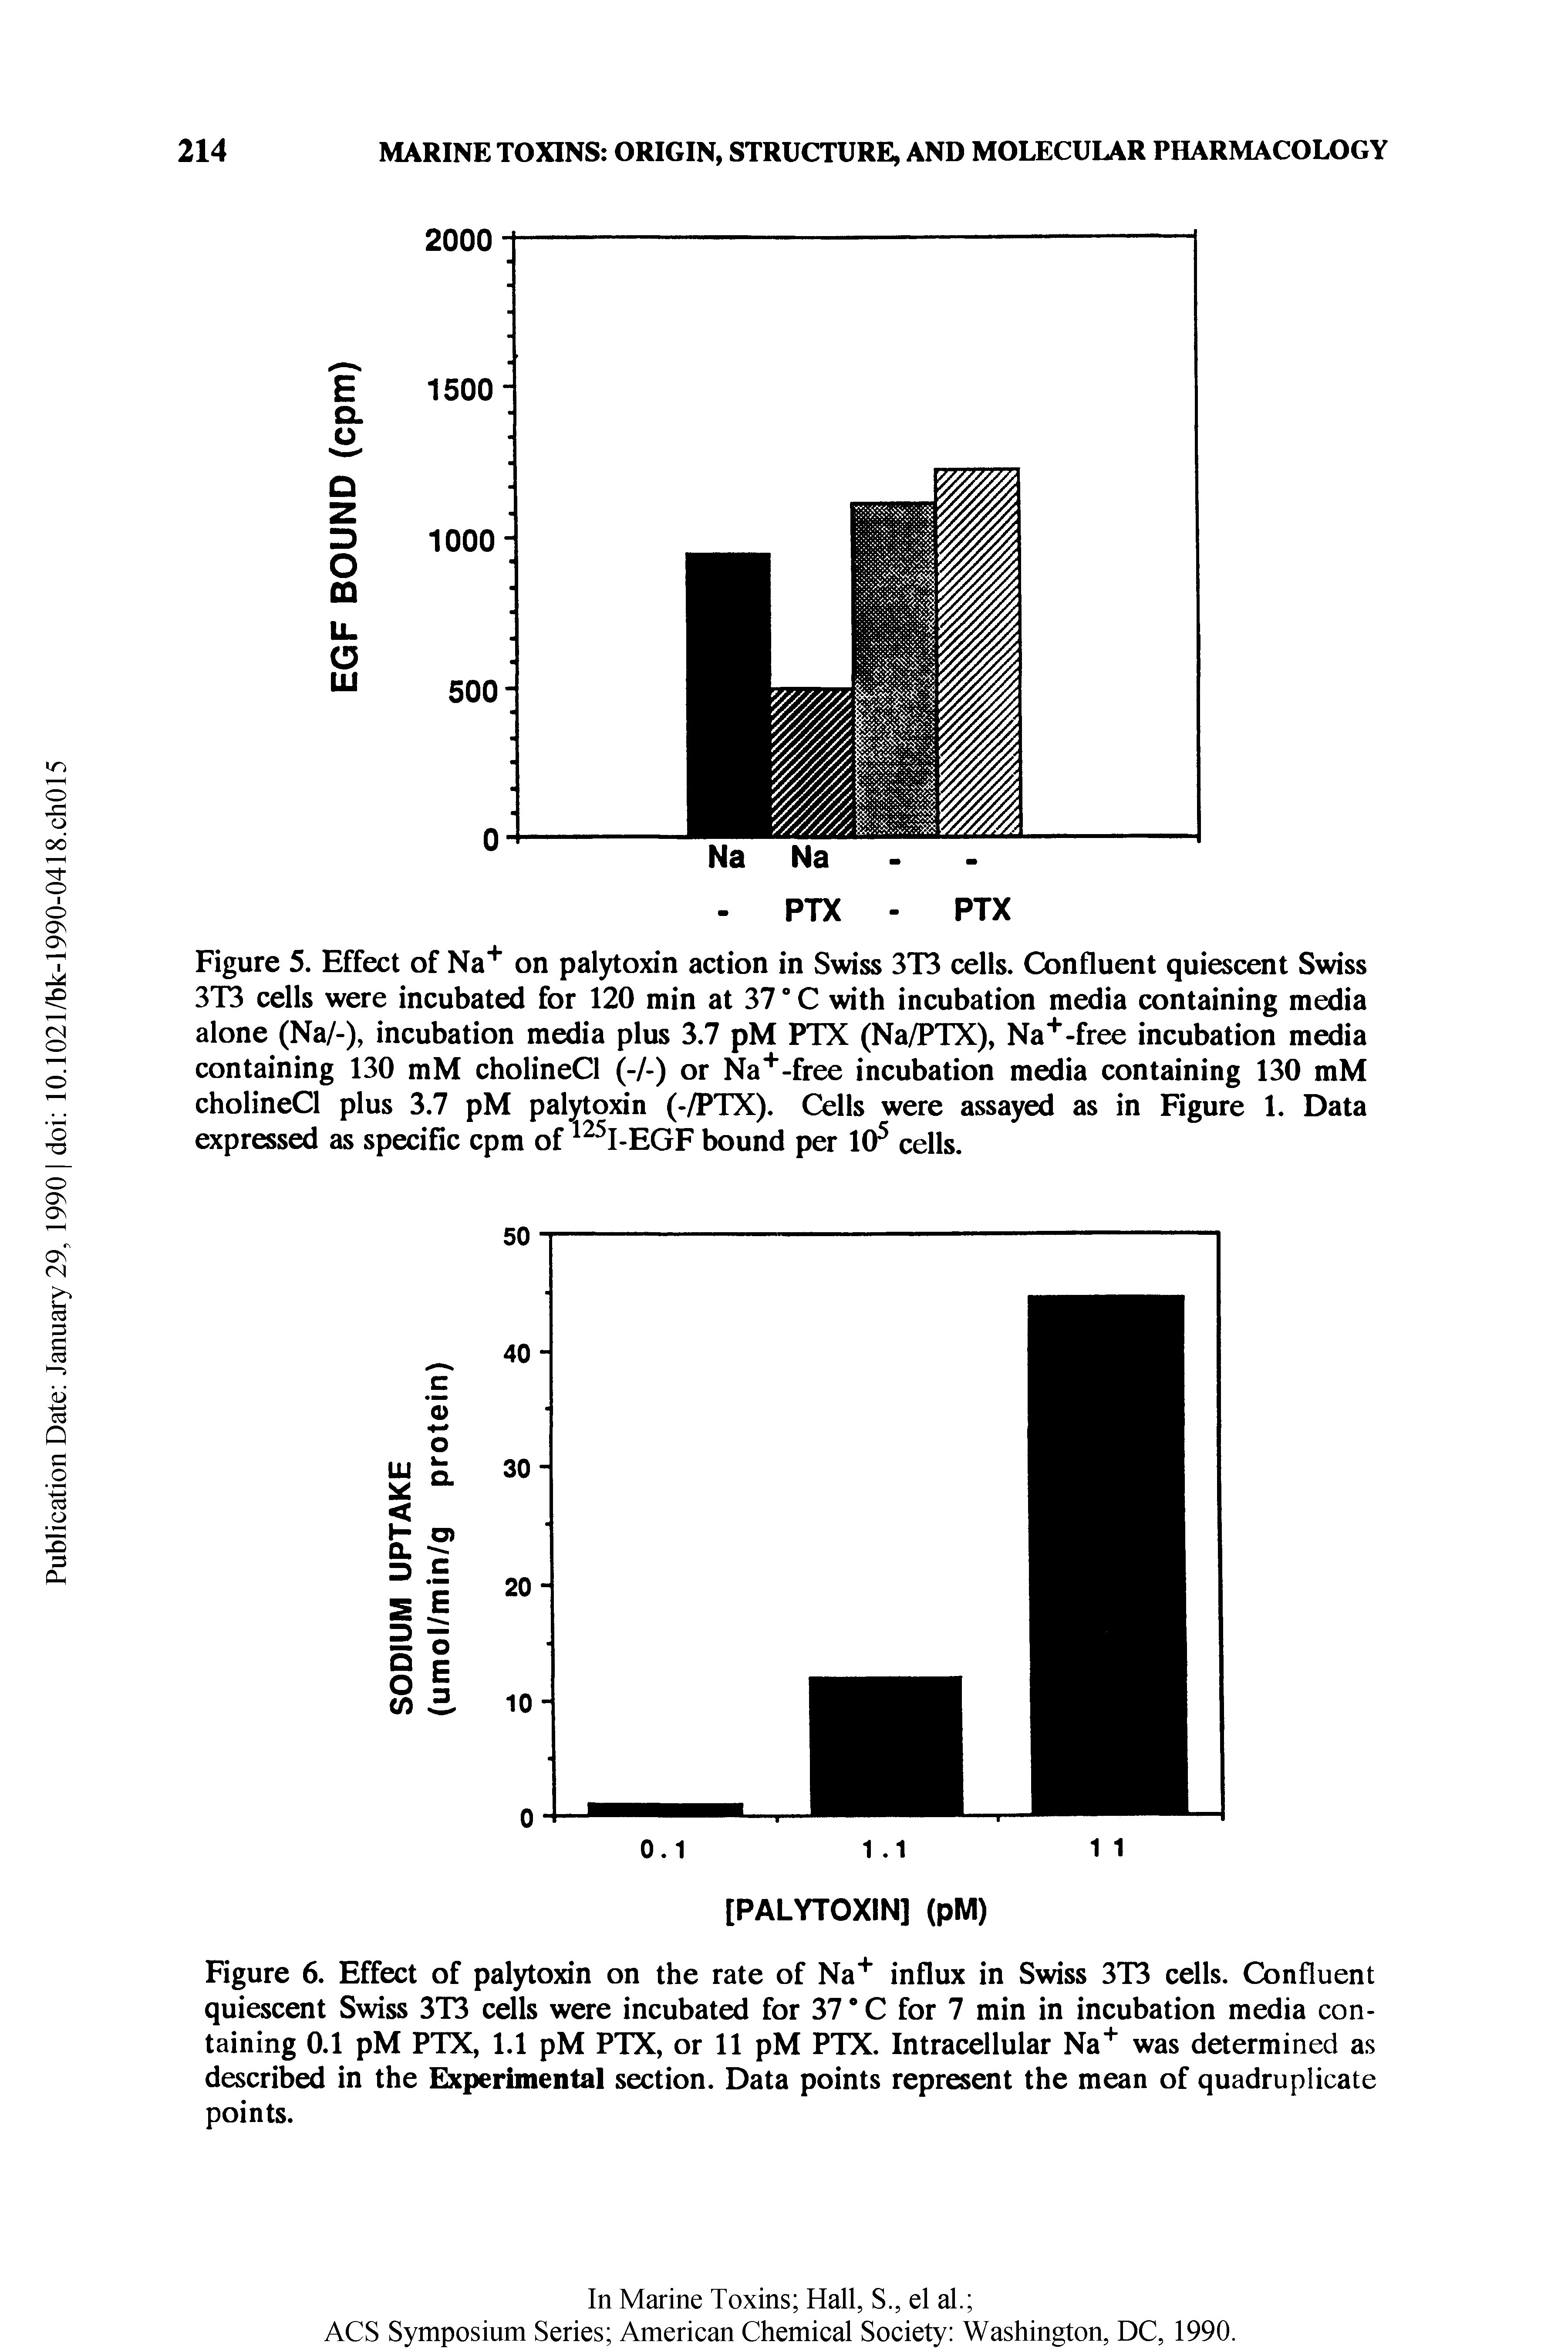 Figure 6. Effect of palytoxin on the rate of Na influx in Swiss 3T3 cells. Confluent quiescent Swiss 3T3 cells were incubated for 37 C for 7 min in incubation media containing 0.1 pM PTX, 1.1 pM PTX, or 11 pM PTX. Intracellular Na was determined as described in the Experimental section. Data points represent the mean of quadruplicate points.